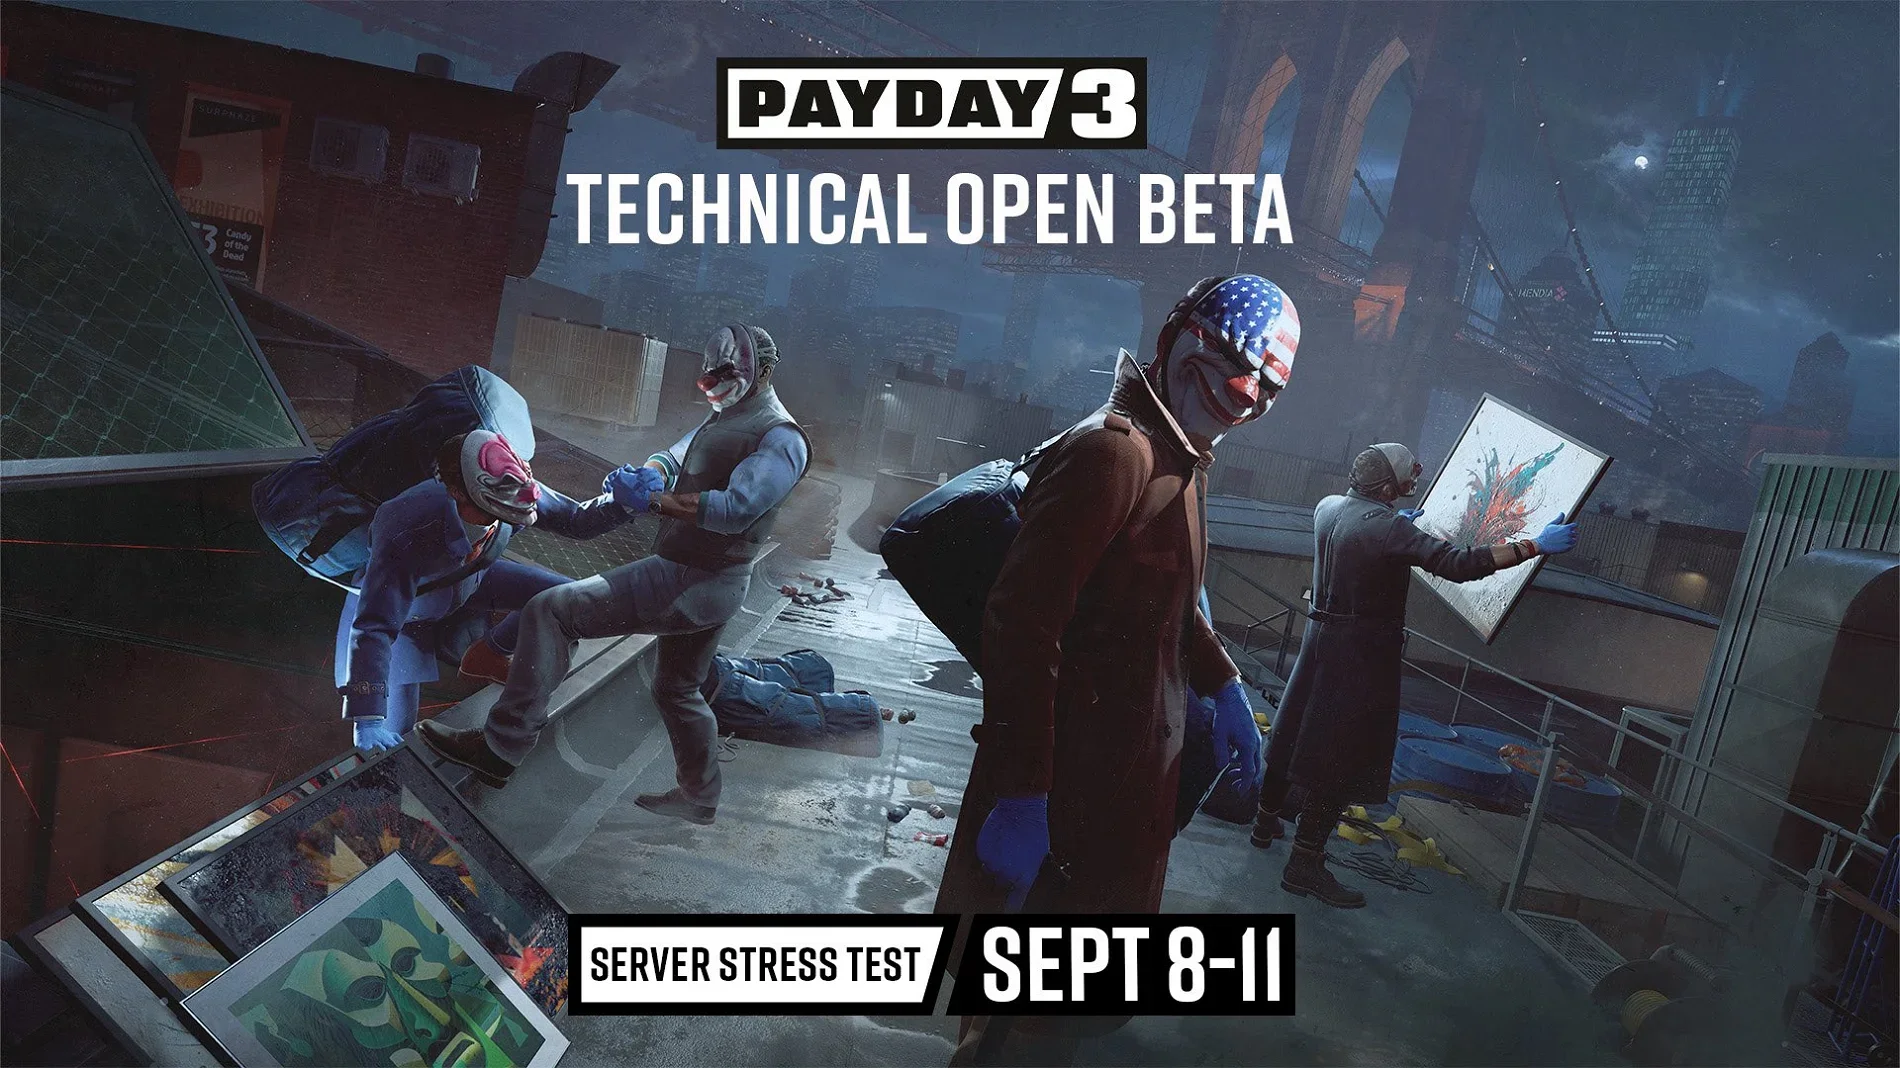 Payday 3 Developers Announce Big Technical Beta